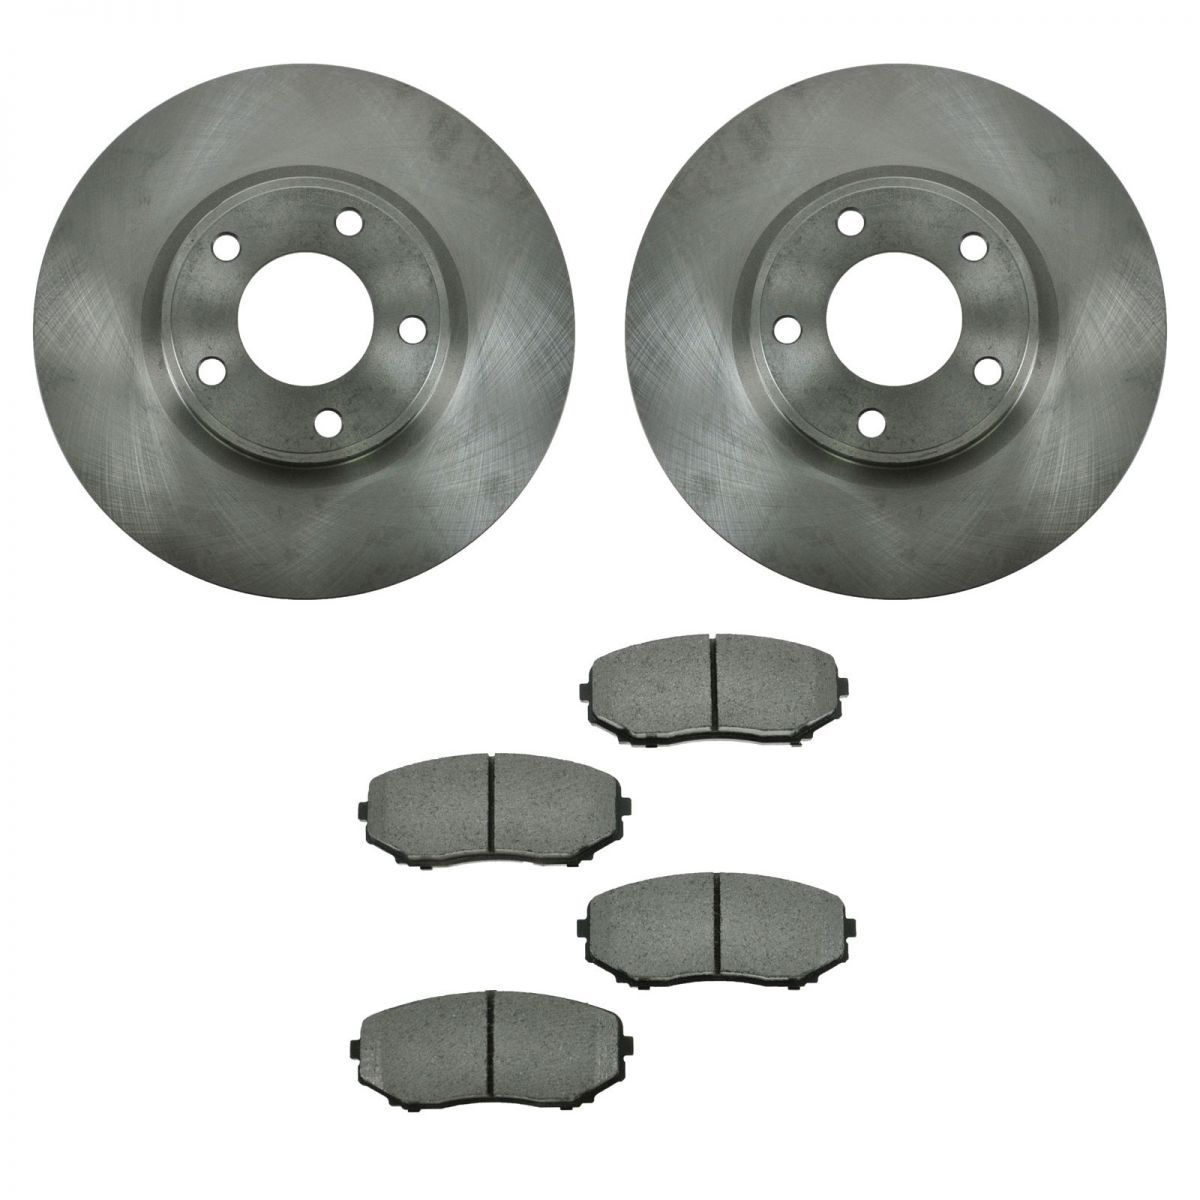 Brake pads and rotors for ford edge #4